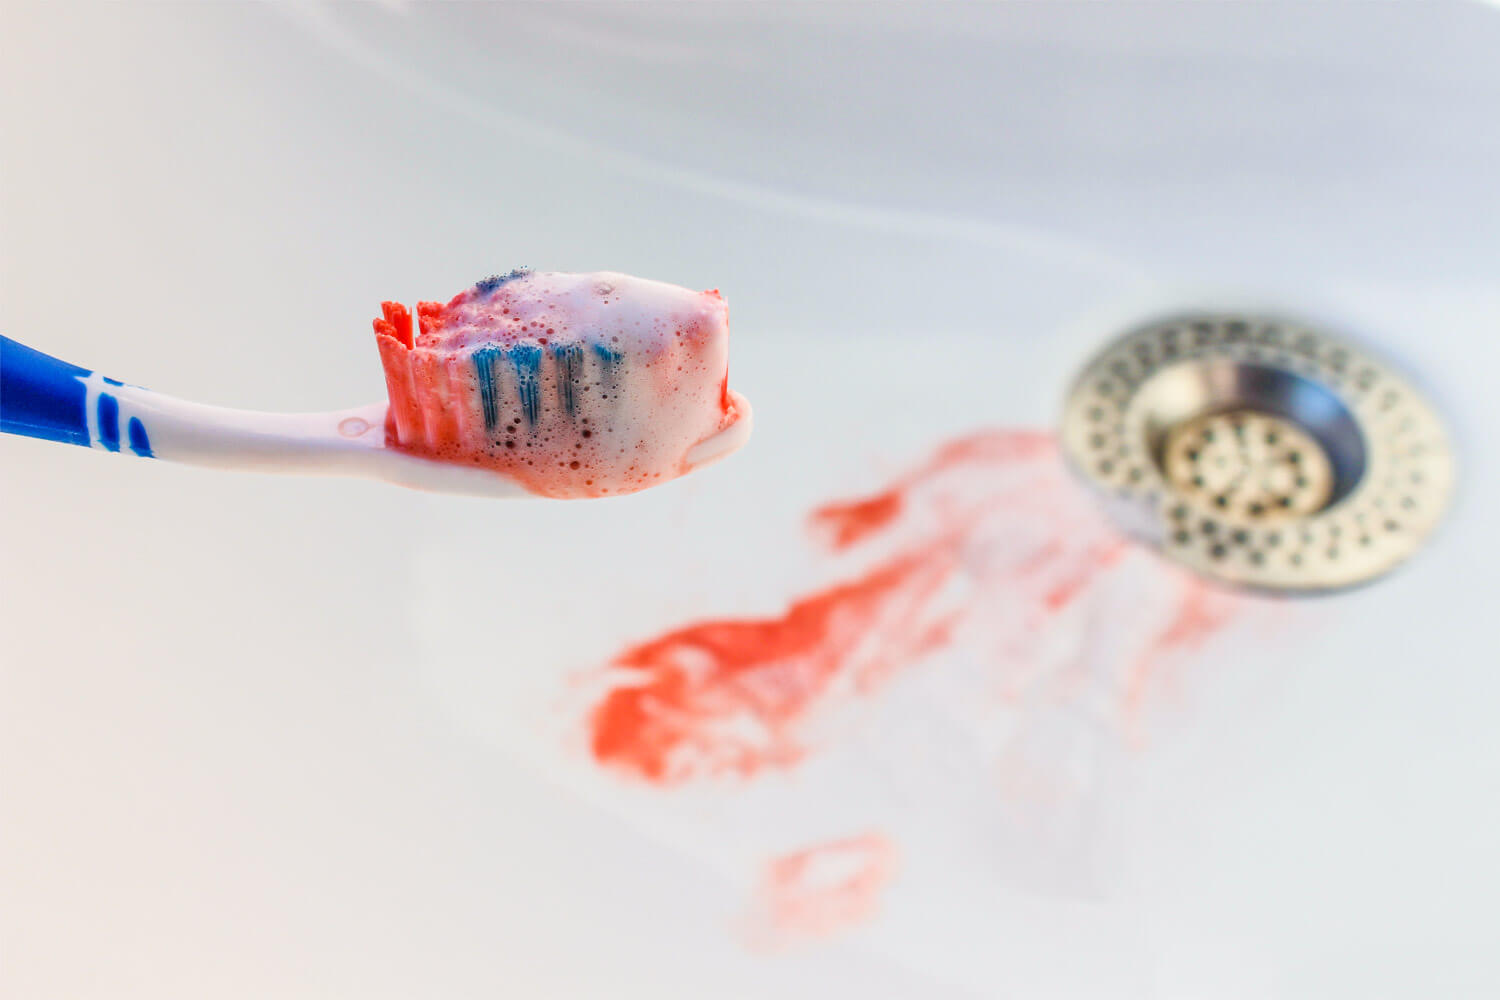 Toothbrush with blood on the bristles and blood in the sink from gum disease